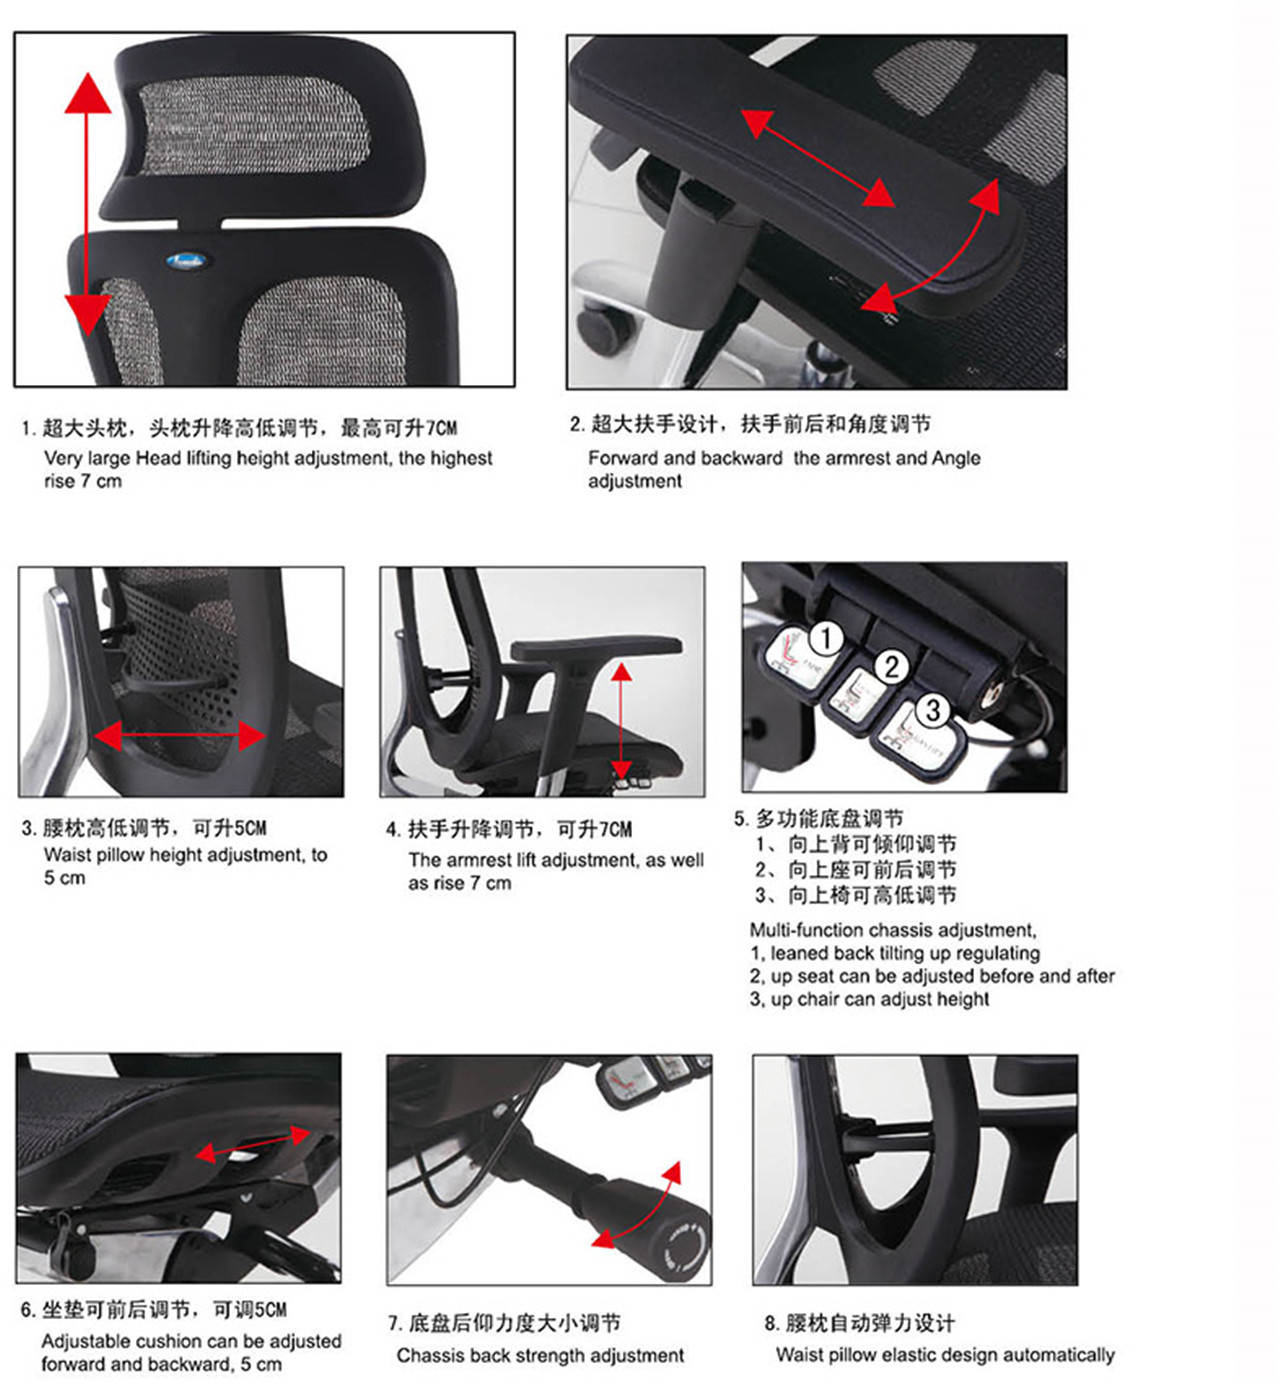 I-Ergonomic Office Chair with Lumbar Support Back, Adjustable Headrest (3)